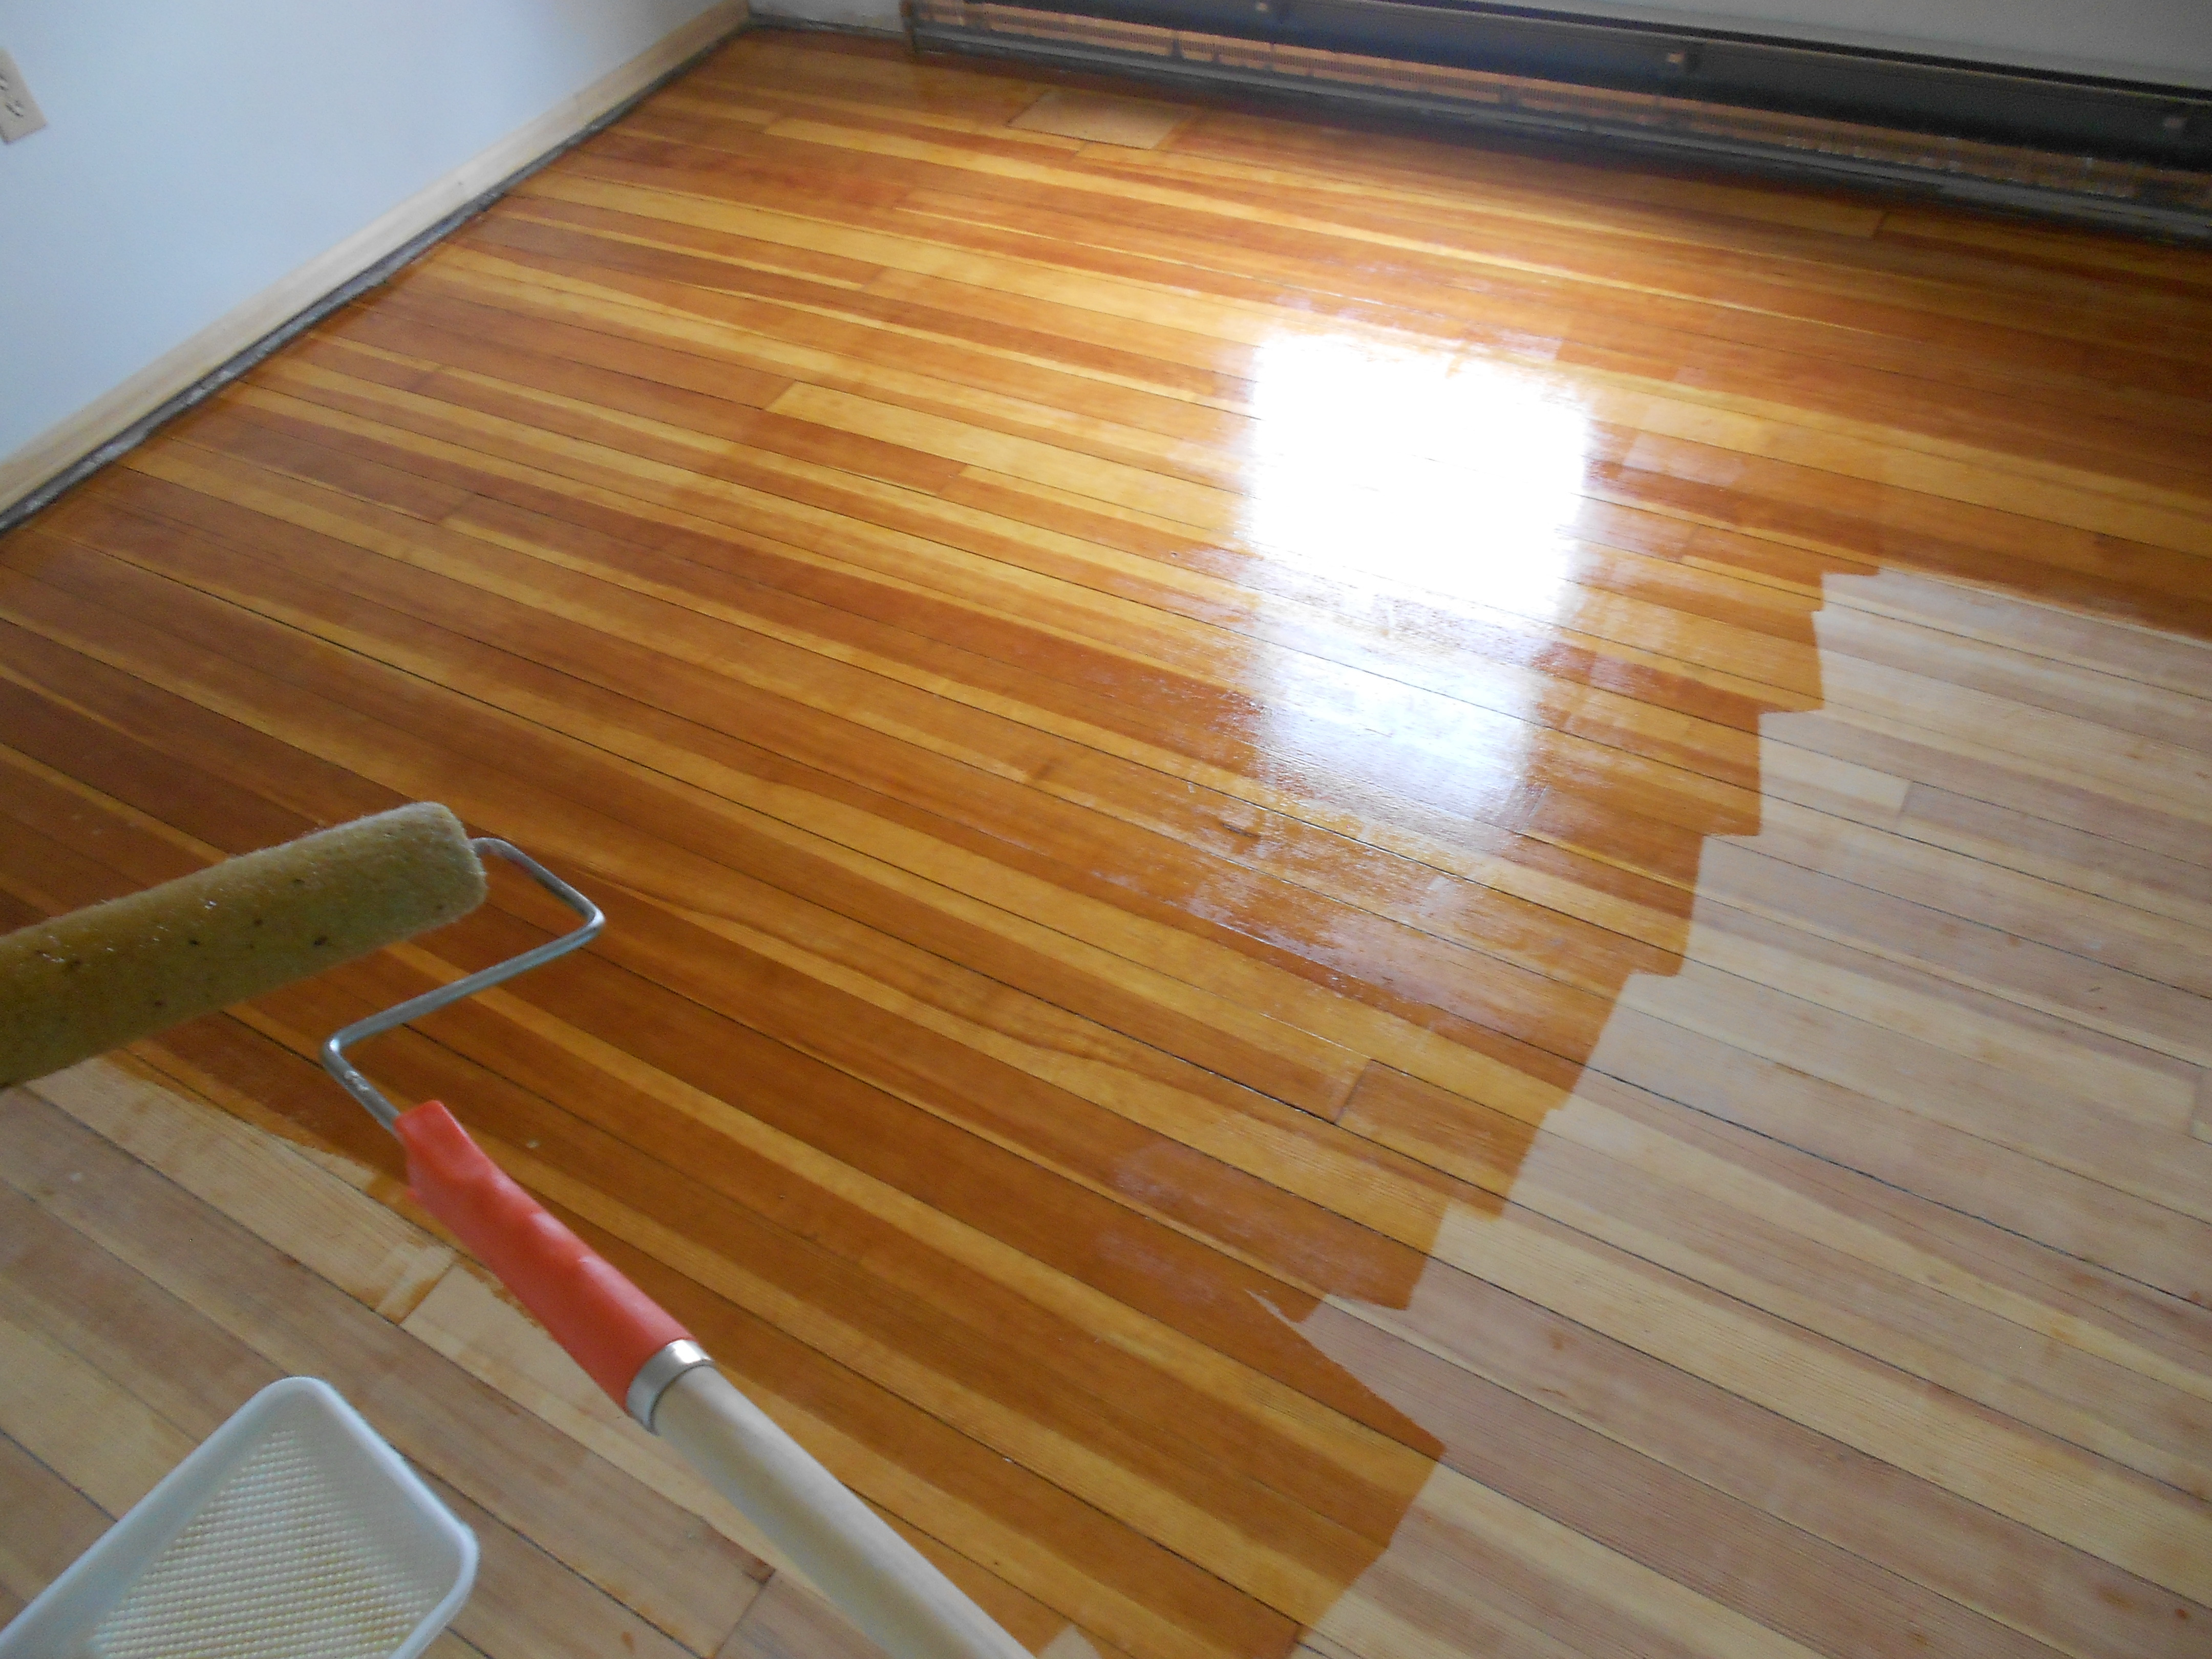 Restaining Hardwood Floors Diy Of How to Apply Varnish to Wood Floors Gallery Of Wood and Tile Pertaining to 7 Best Guide to Refinishing Hardwood Floor Images On Pinterest Best Hardwood Floor Clear Coat